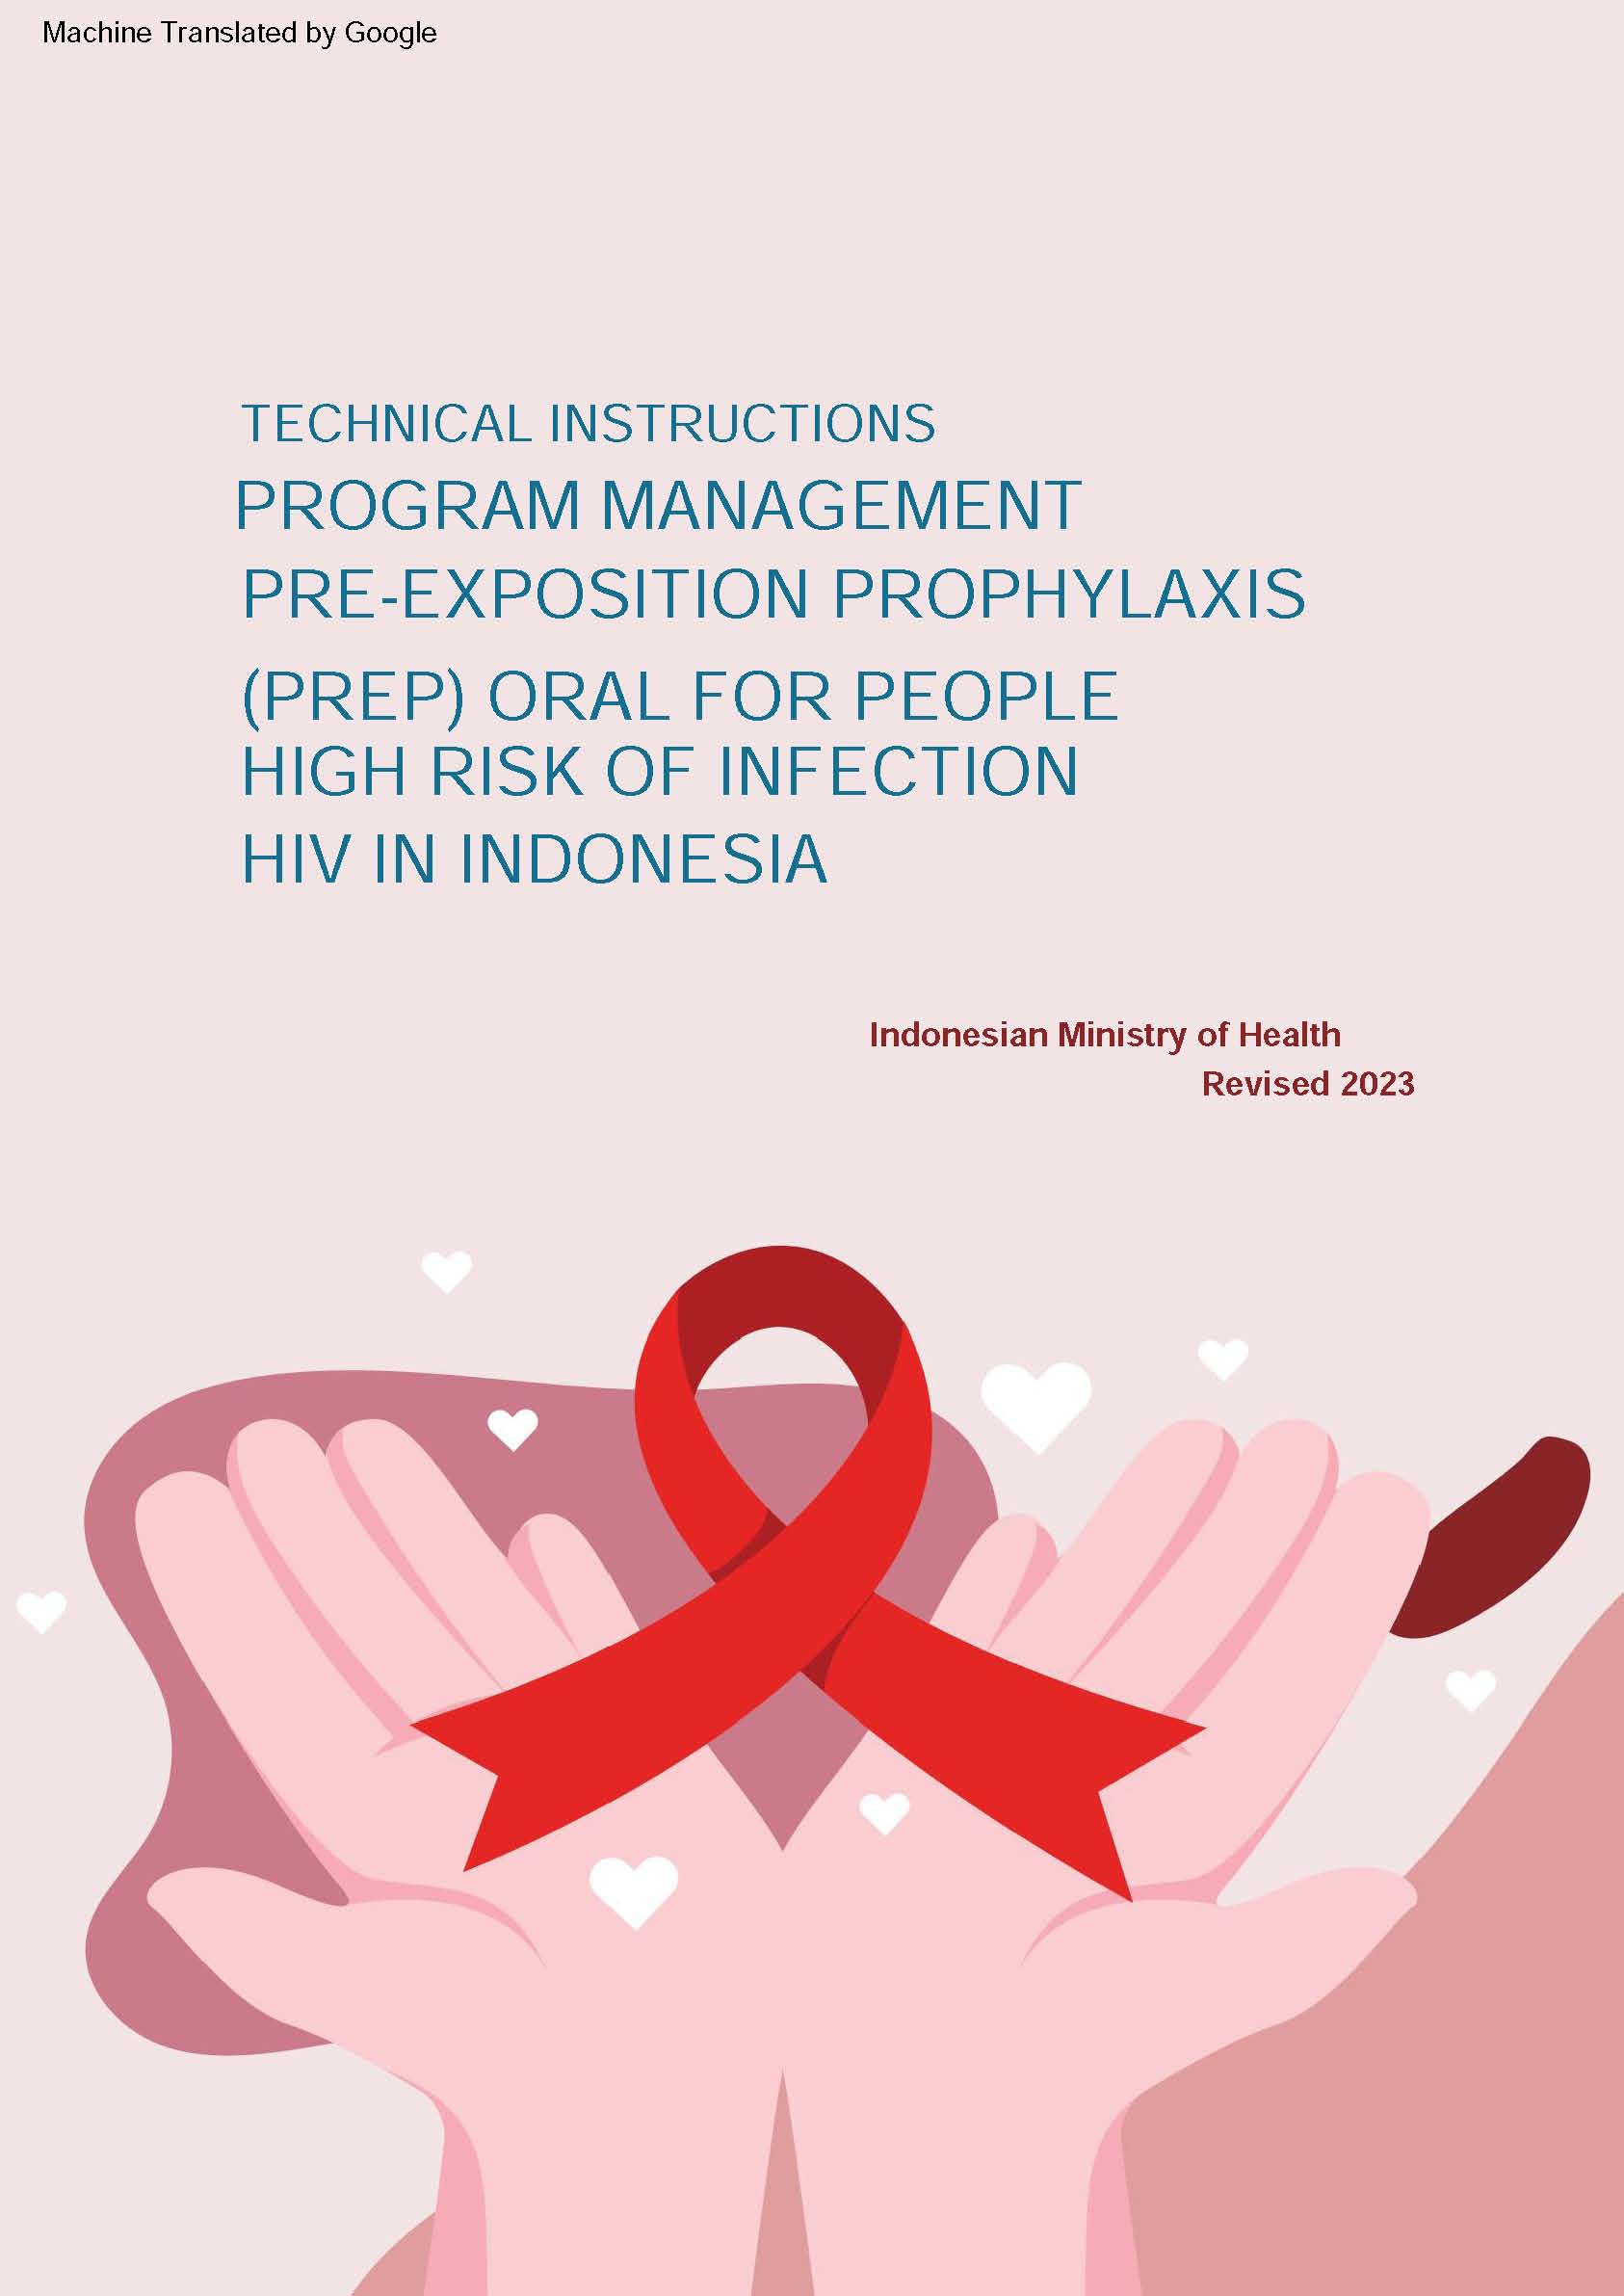 Program management HIV infected high risk people pre-exposition prophylaxis technical instructions in Indonesia (prep) oral